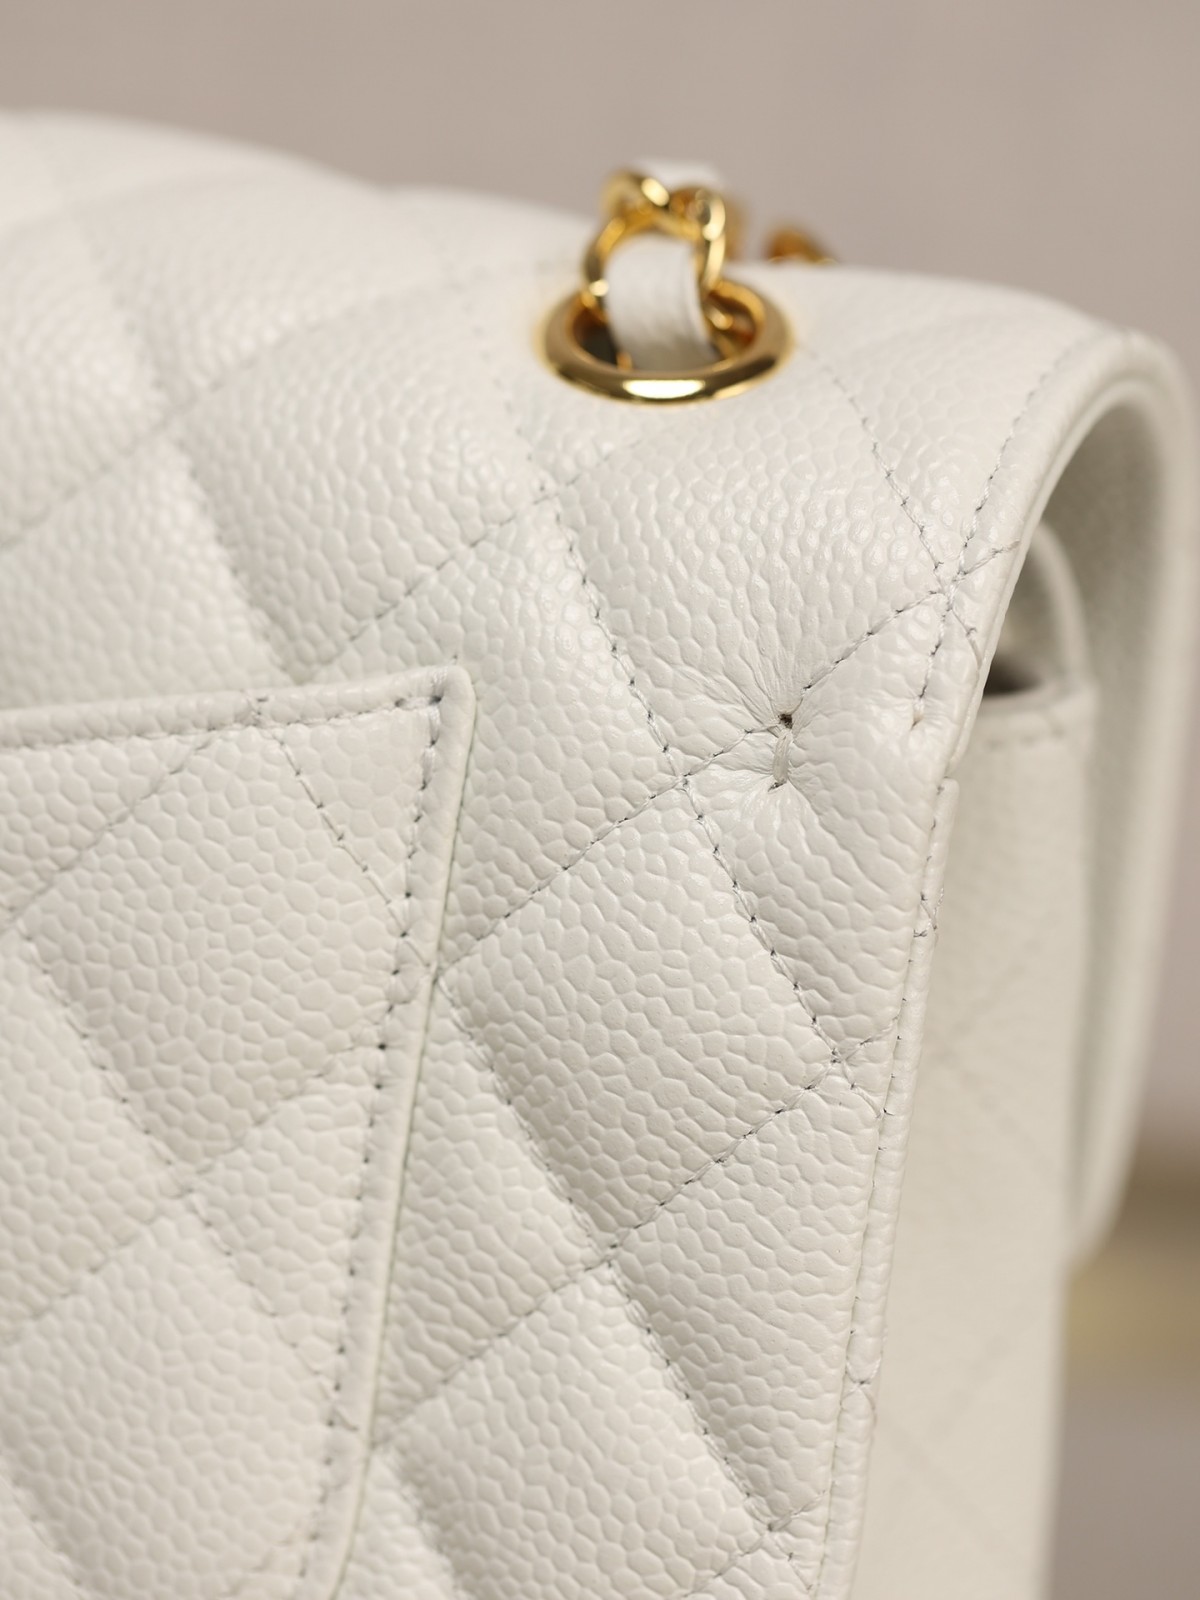 How good quality is a Shebag White Chanel Classic flap bag with gold and caviar leather（2023 Week 43）-Best Quality adịgboroja Louis vuitton akpa Online Store, oyiri mmebe akpa ru